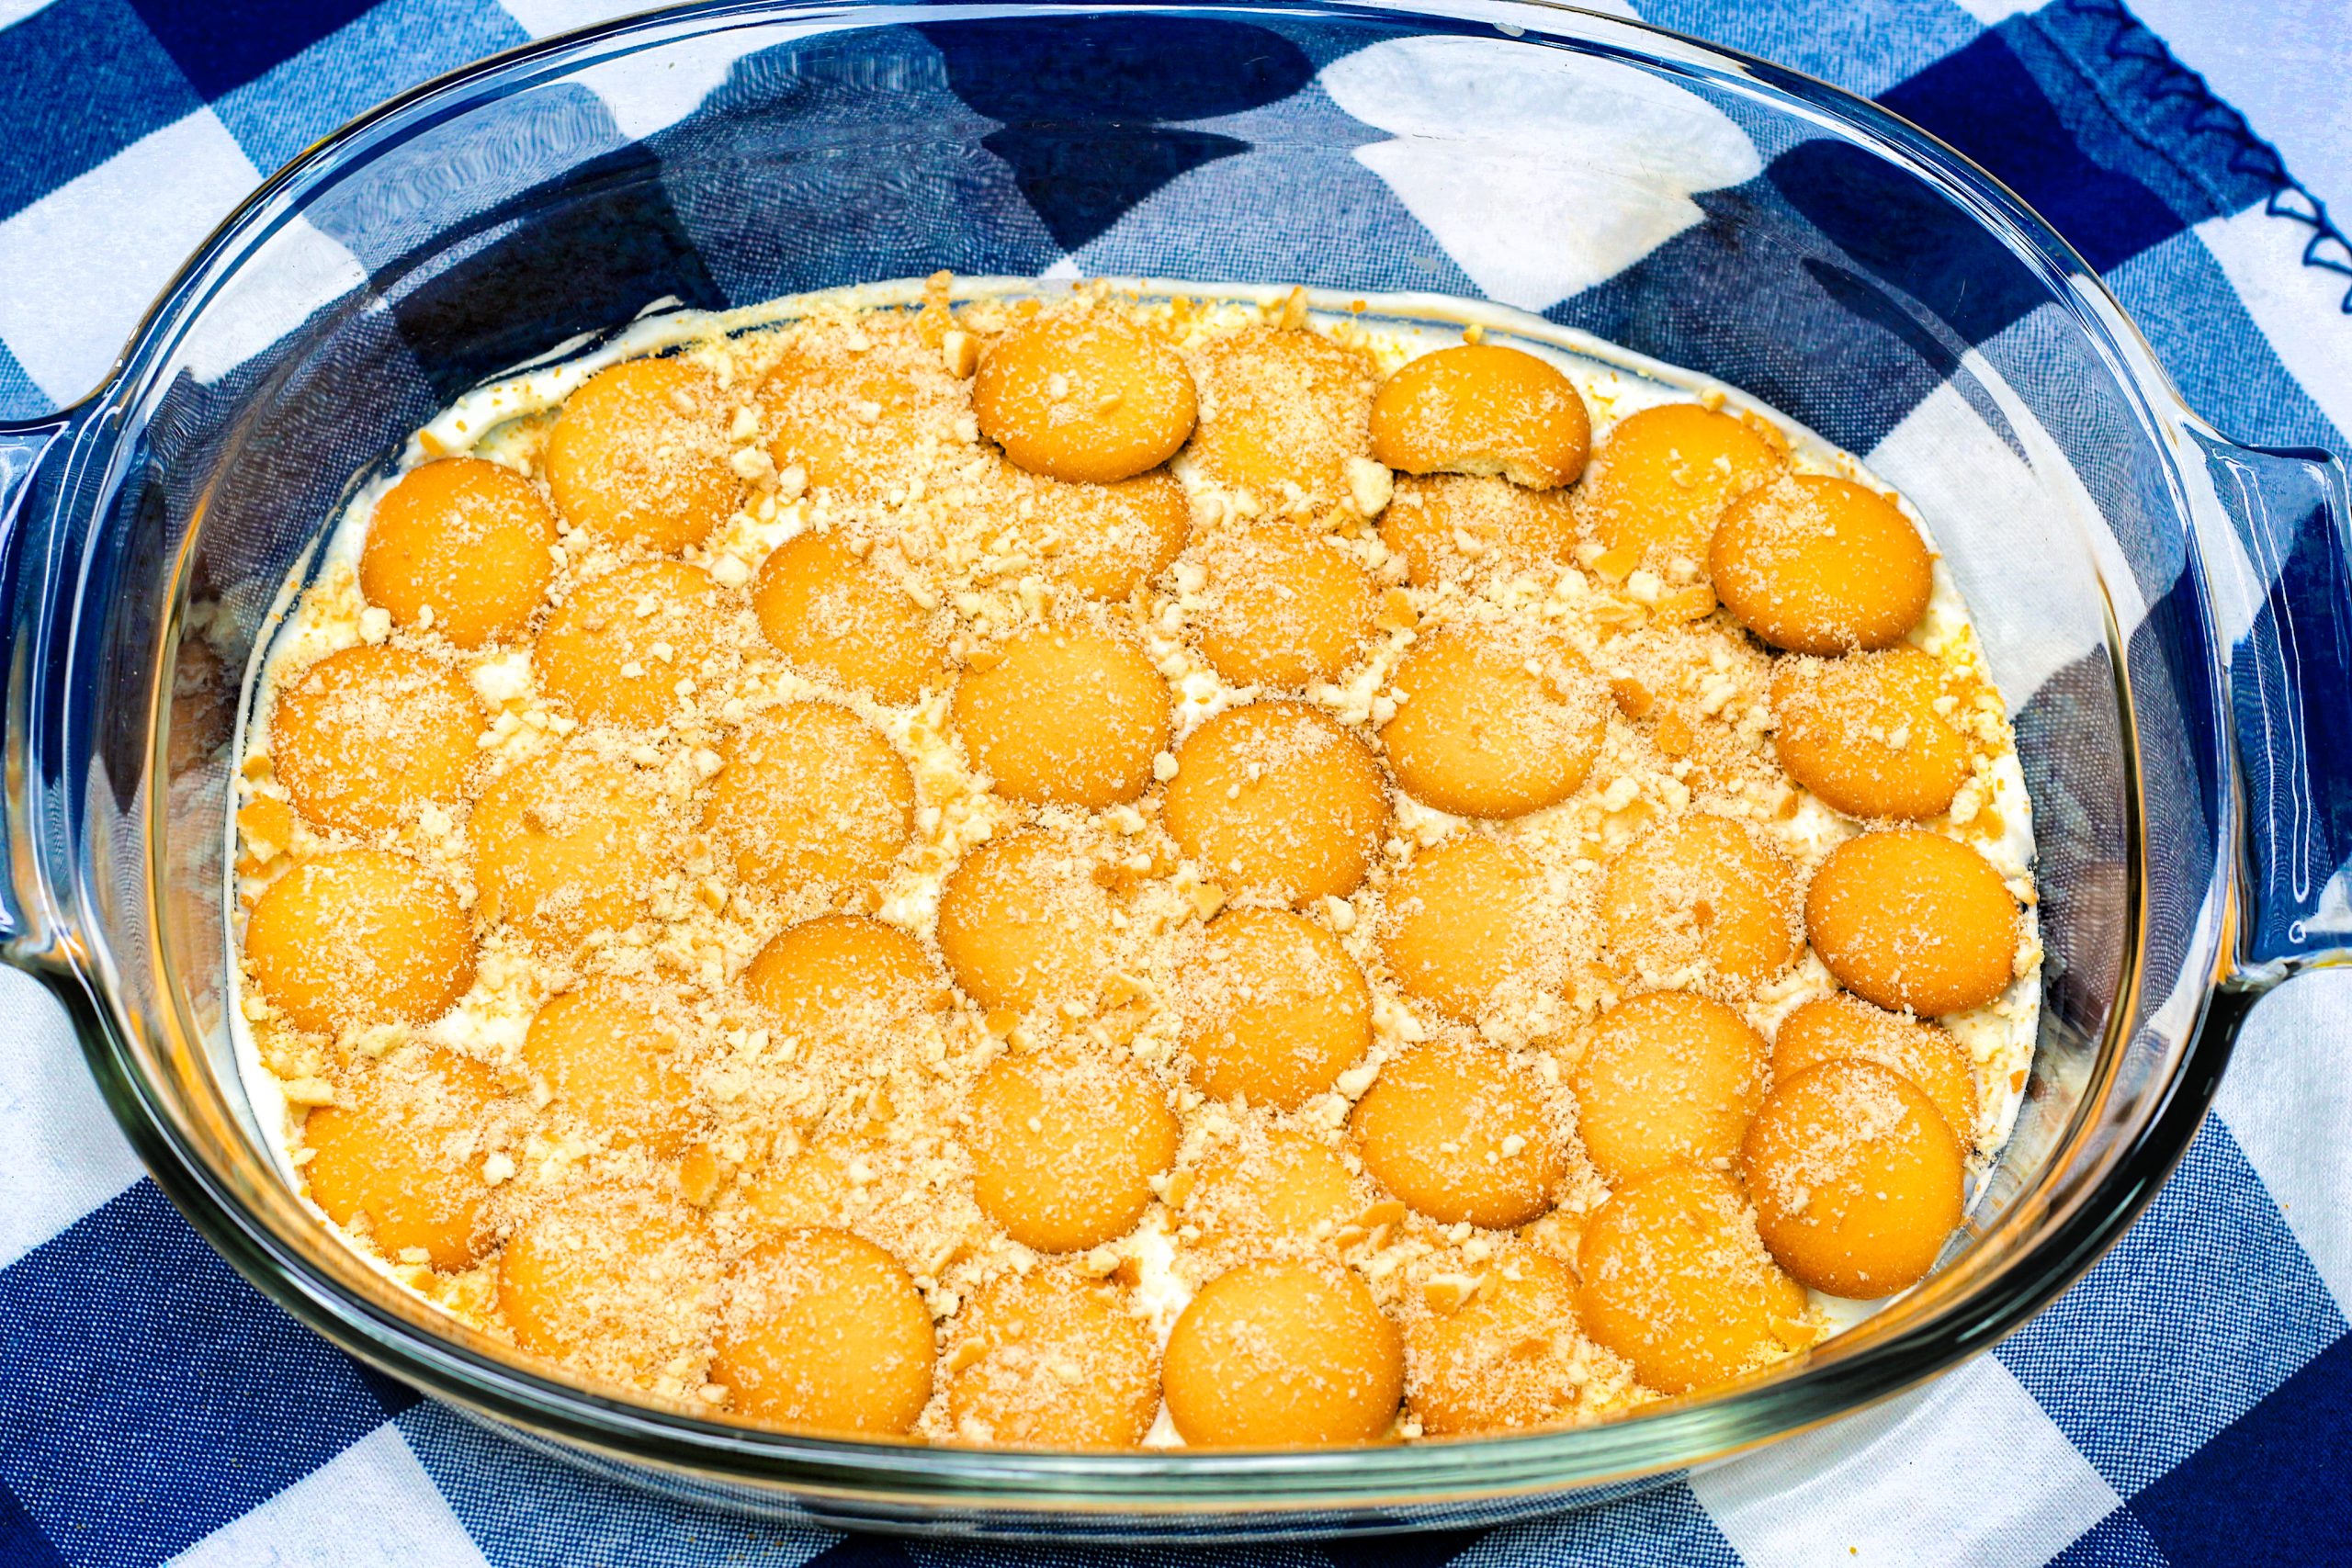 Lay an even layer of the nilla cookies onto the pudding